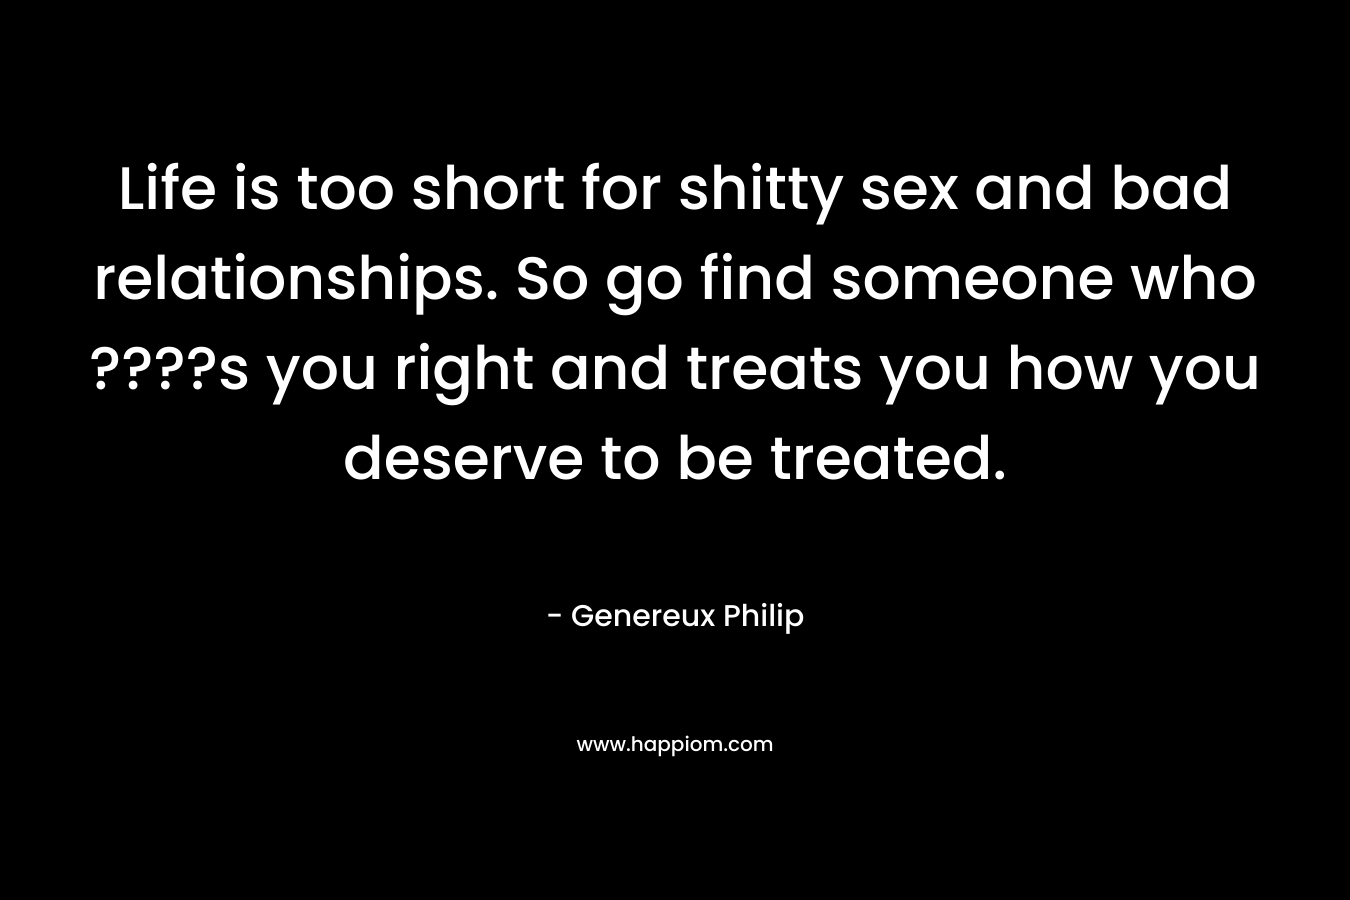 Life is too short for shitty sex and bad relationships. So go find someone who ????s you right and treats you how you deserve to be treated.